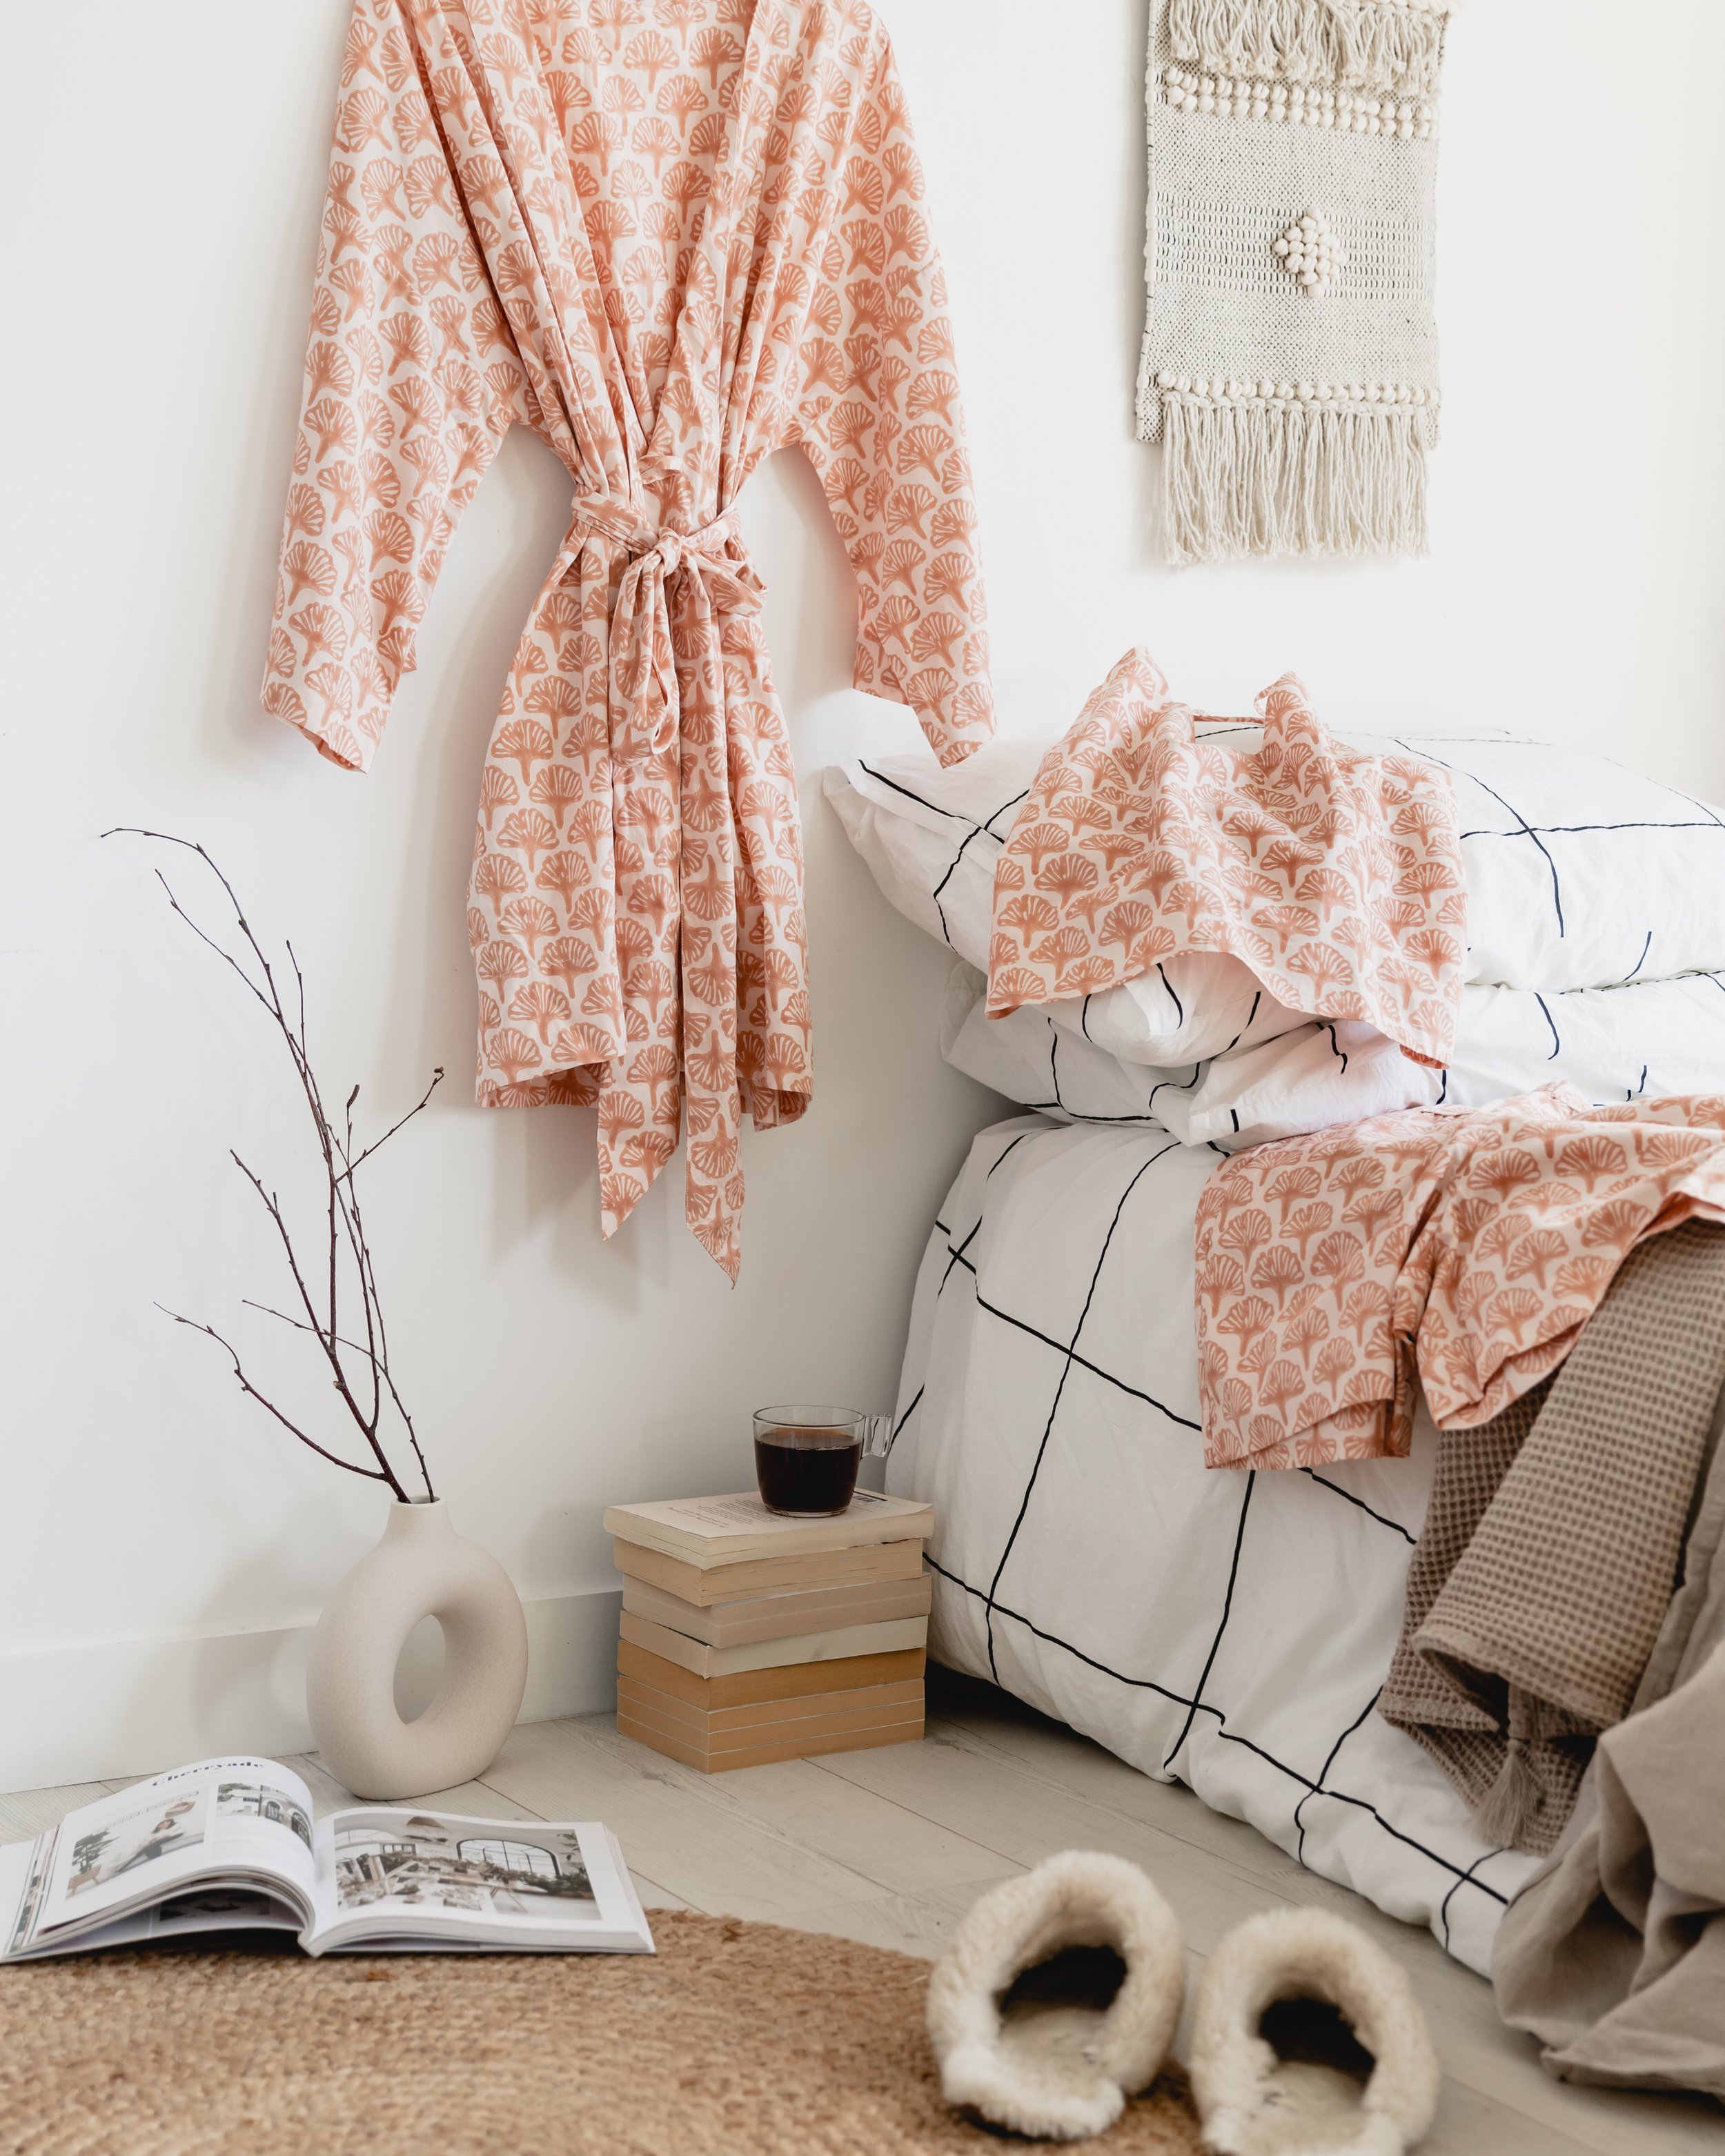 Rho Organic loungewear hanging up by a bed